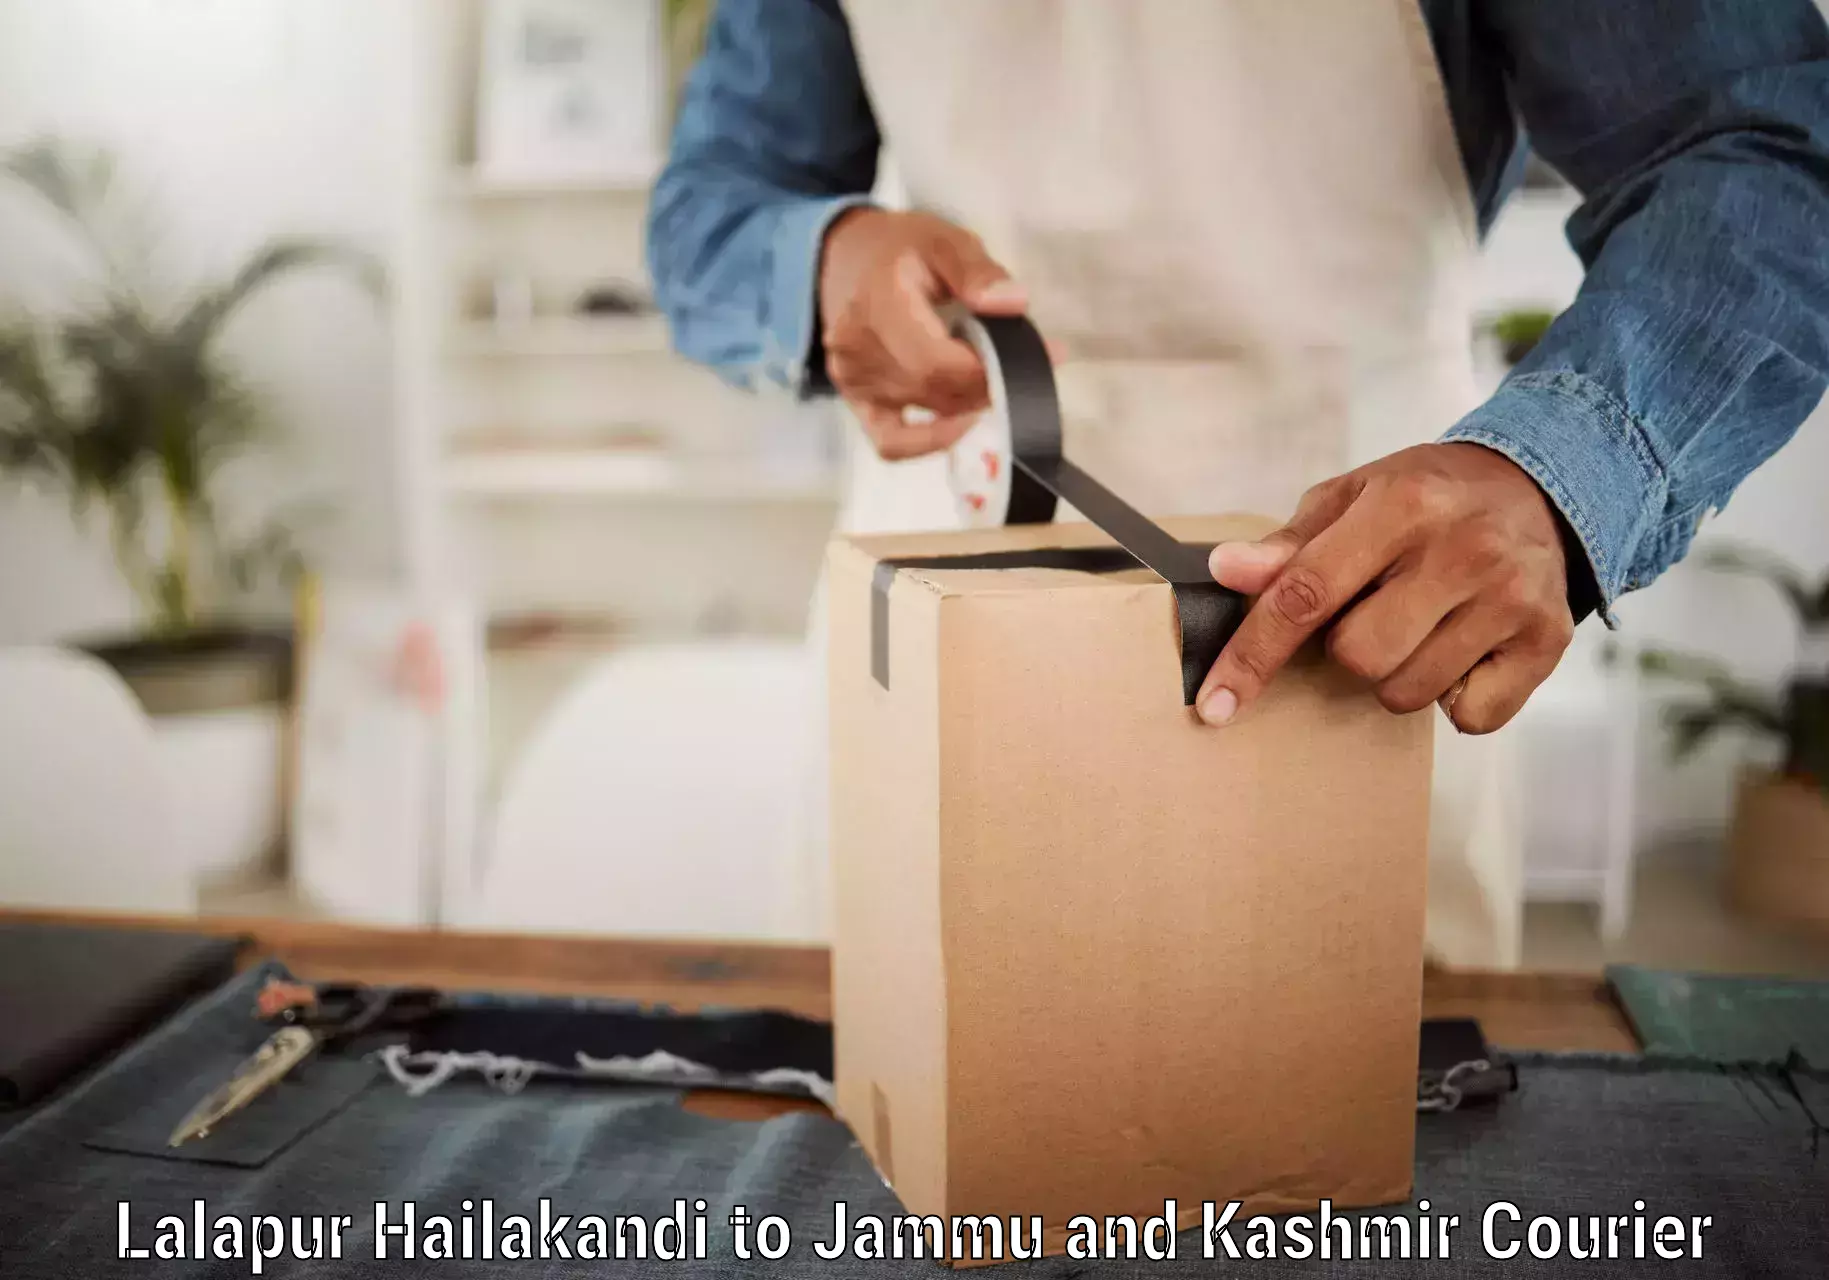 Sustainable courier practices Lalapur Hailakandi to Jammu and Kashmir